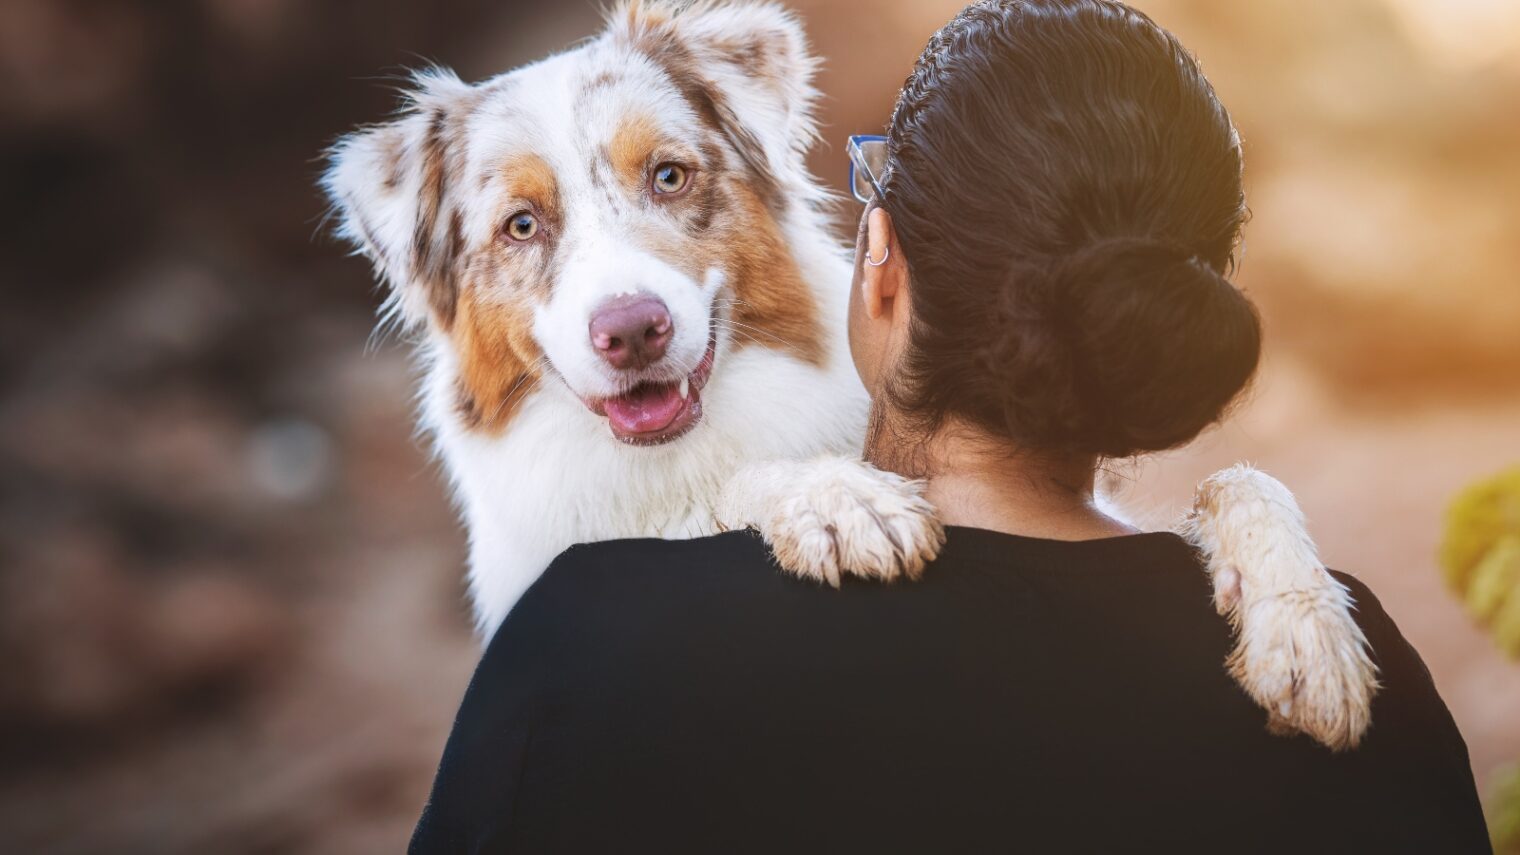 An Australian shepherd named Pupik shares a hug with her owner on Michmoret Beach. Photo by Elinor Roizman/Dog-ma Photography